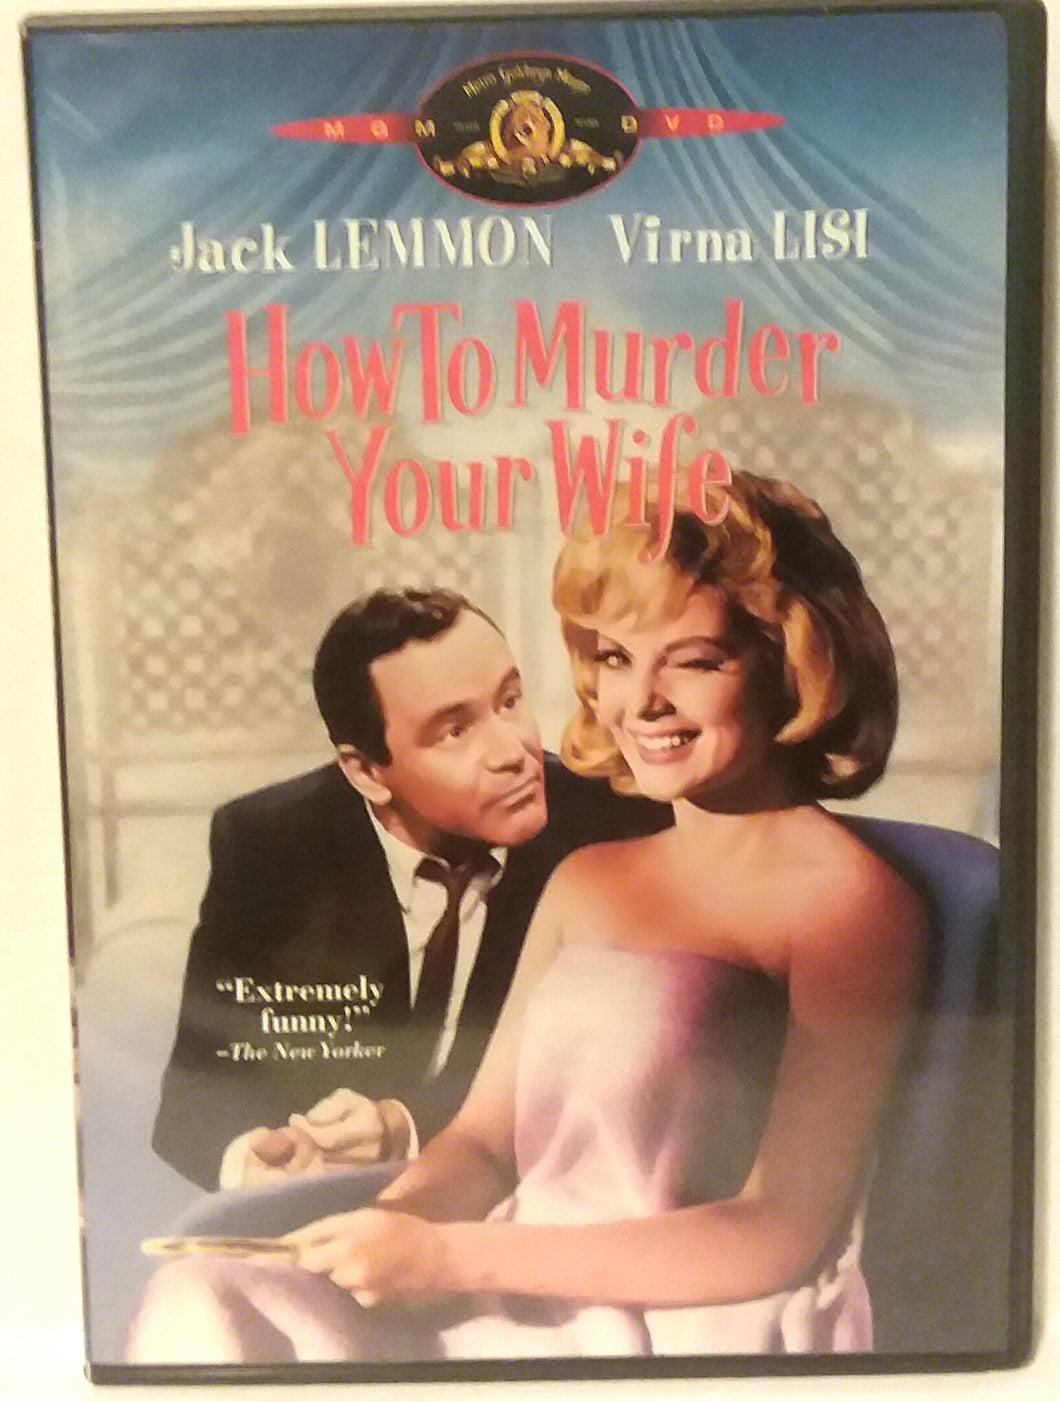 How To Murder Your Wife DVD Vintage Comedy 1965 Jack Lemmon